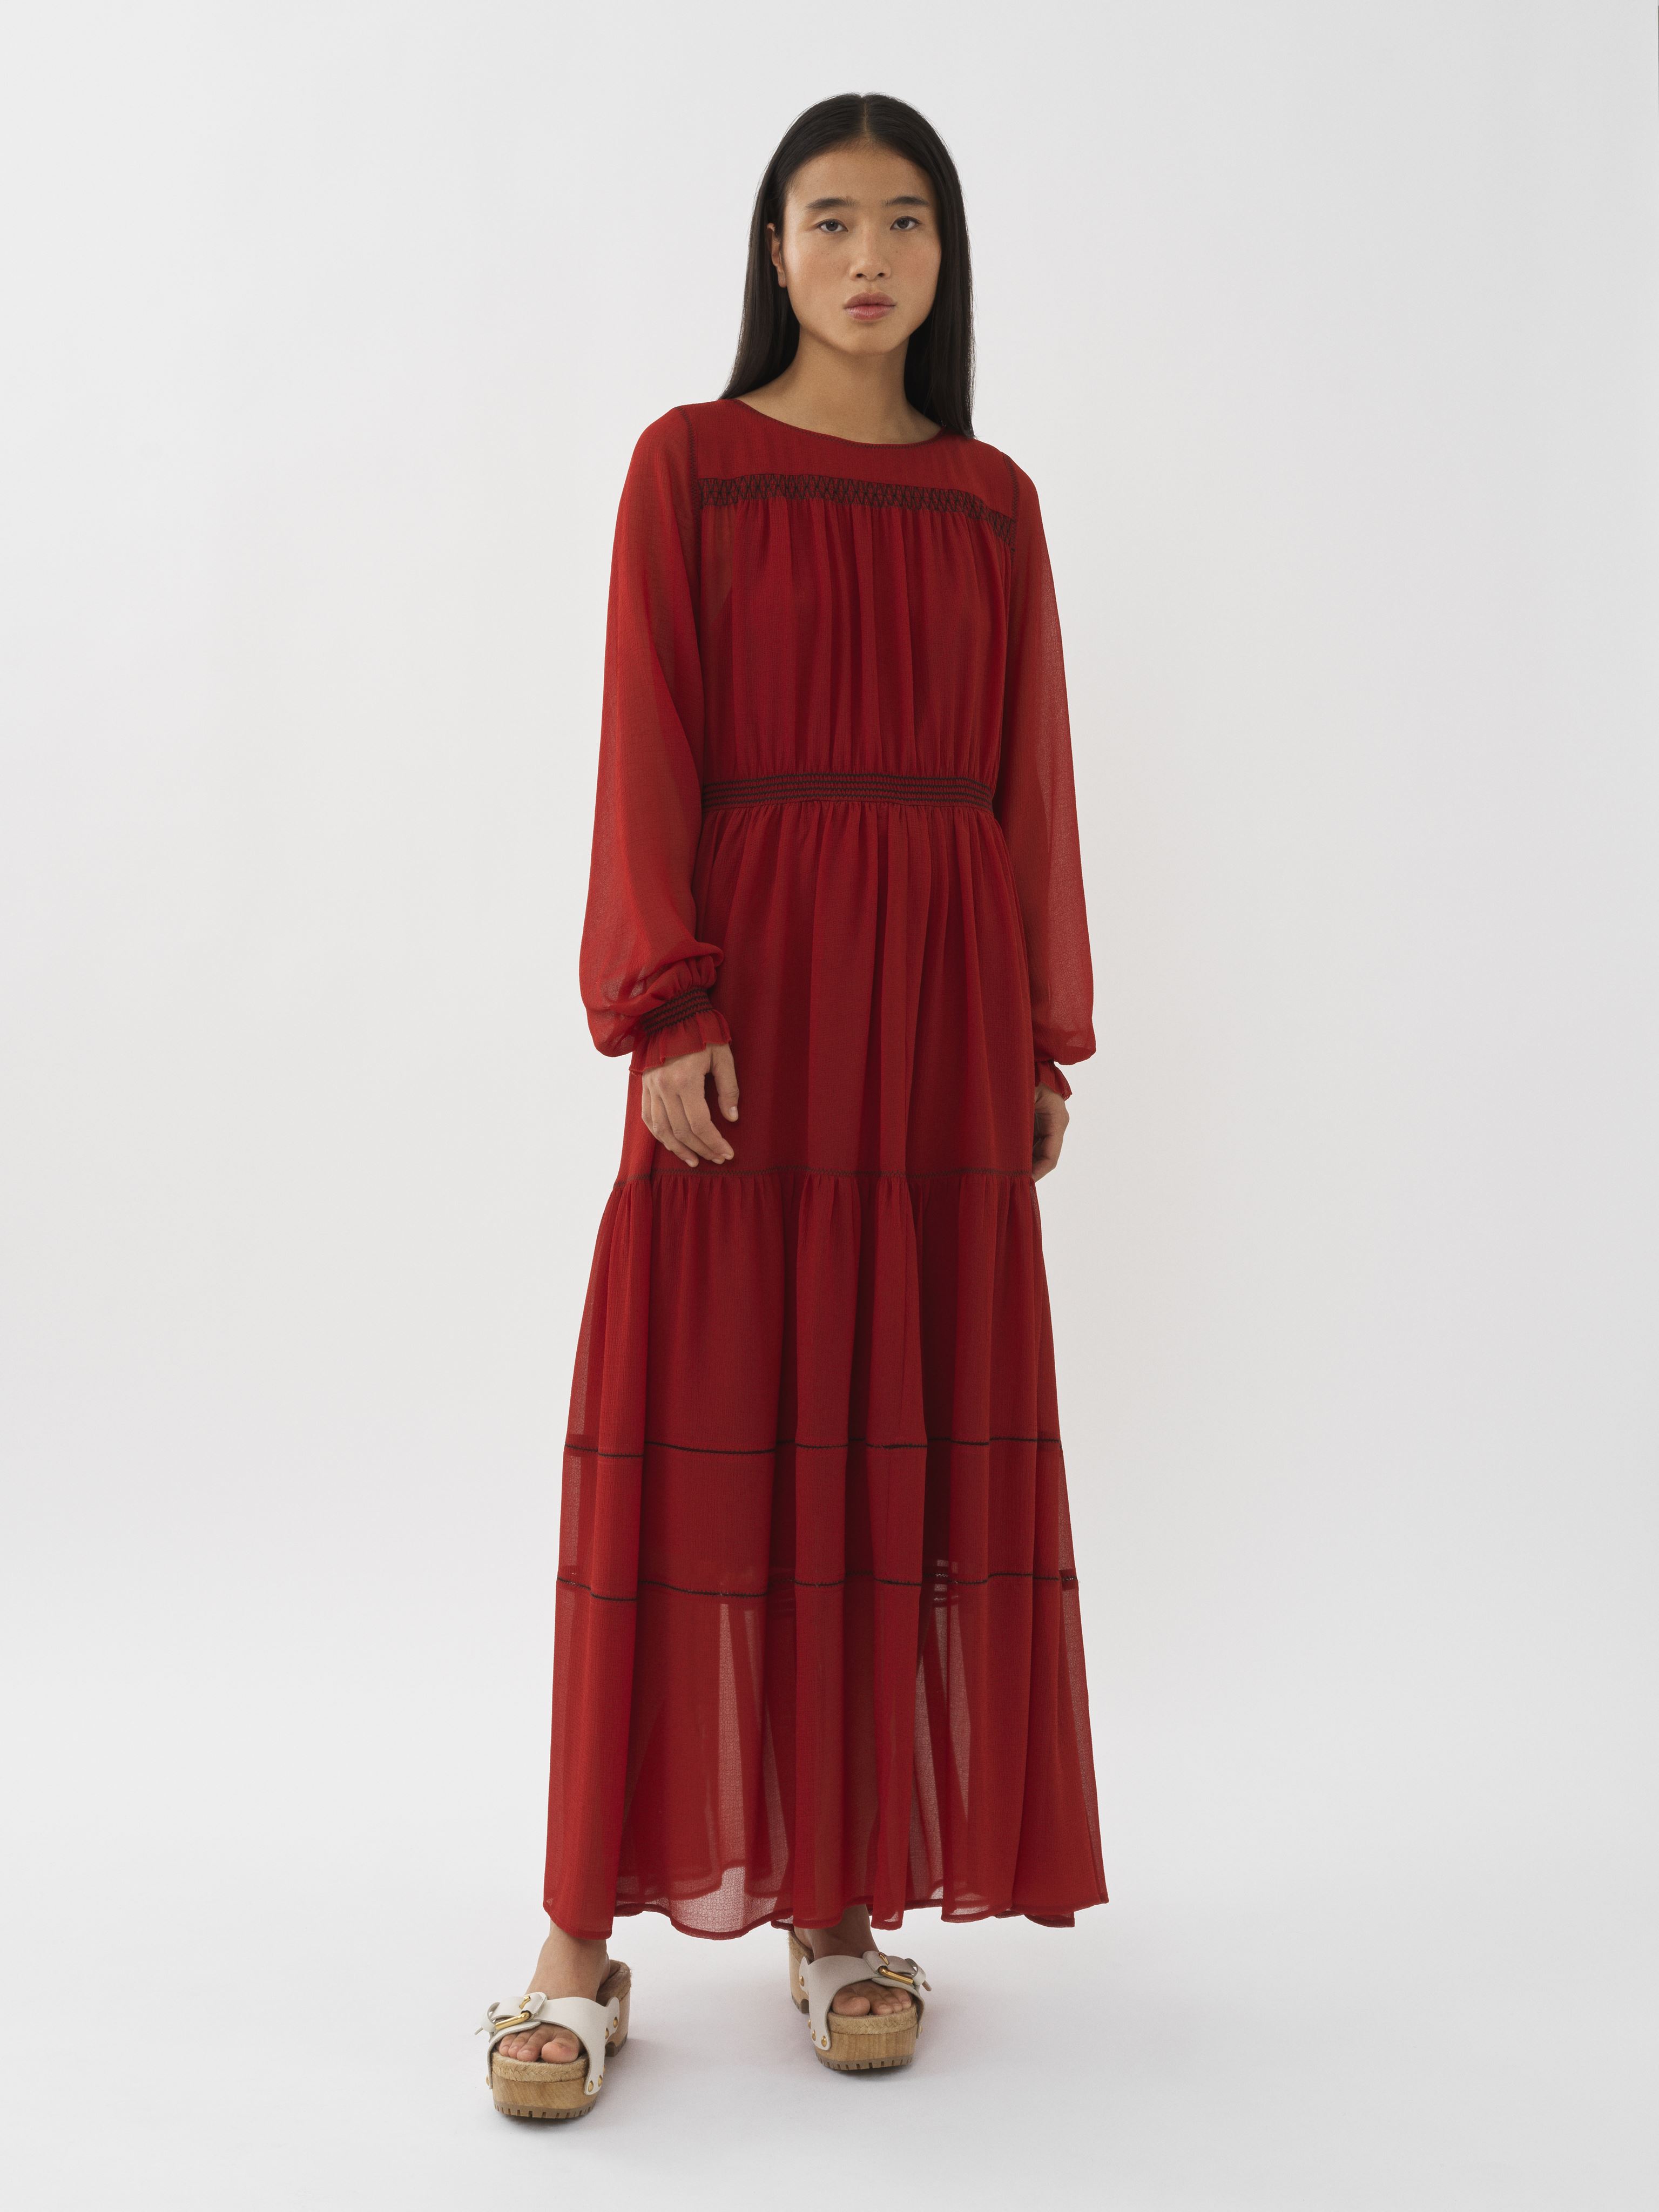 SEE BY CHLOÉ ROBE MAXI À SUPERPOSITIONS FEMME BRUN TAILLE 38 100% POLYESTER